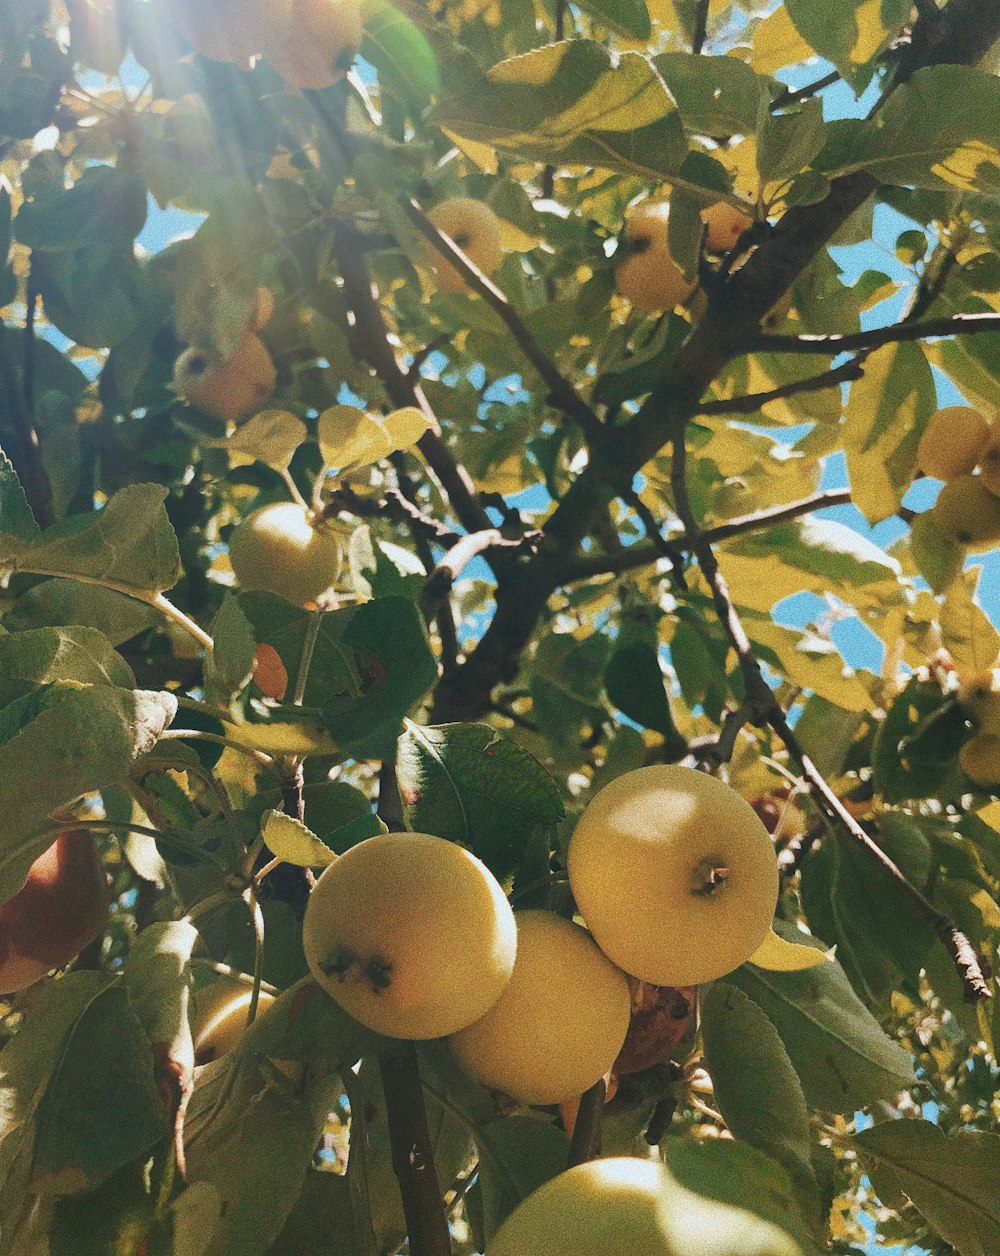 round yellow fruits in tree